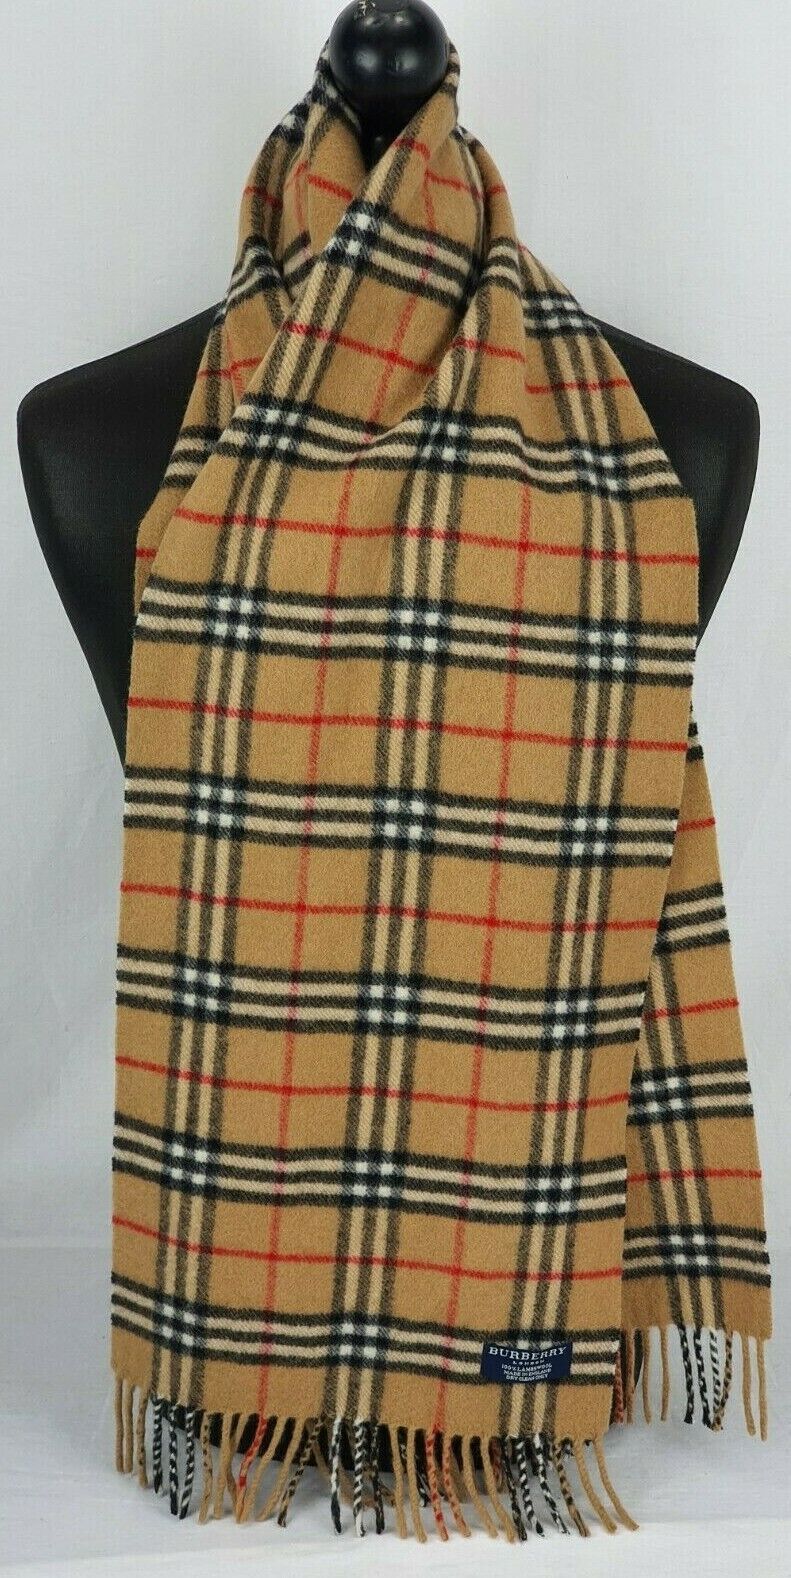 Stol Tradition sandhed Genuine Burberry scarf 100% LAMBSWOOL vintage nova check Beige colour | eBay